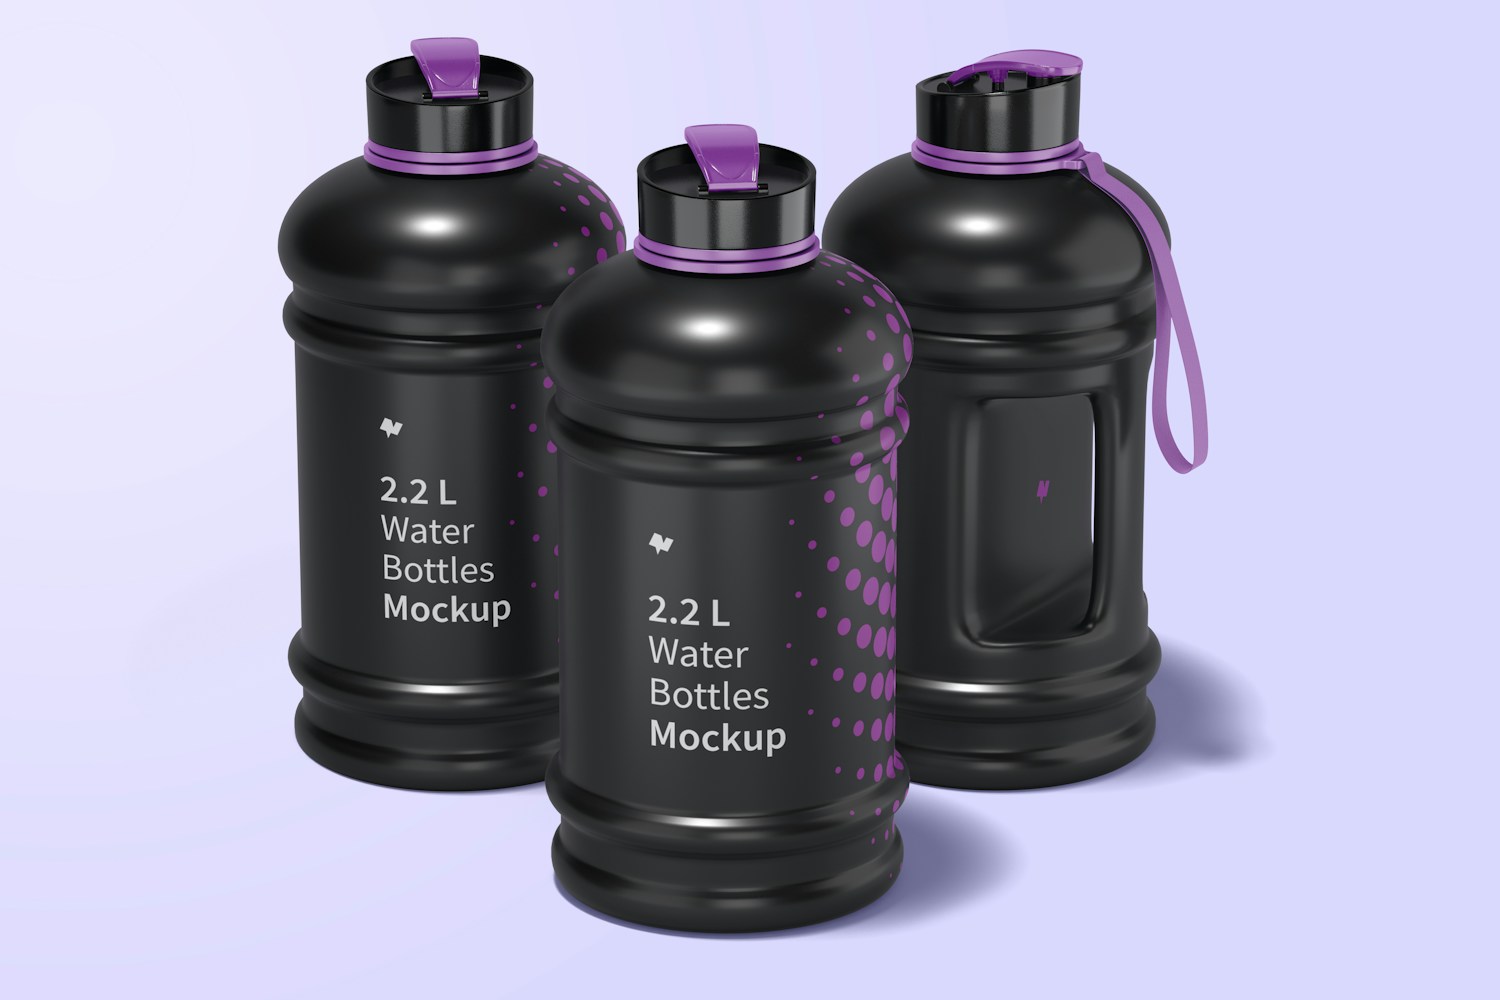 2.2 L Water Bottles Mockup, Front View